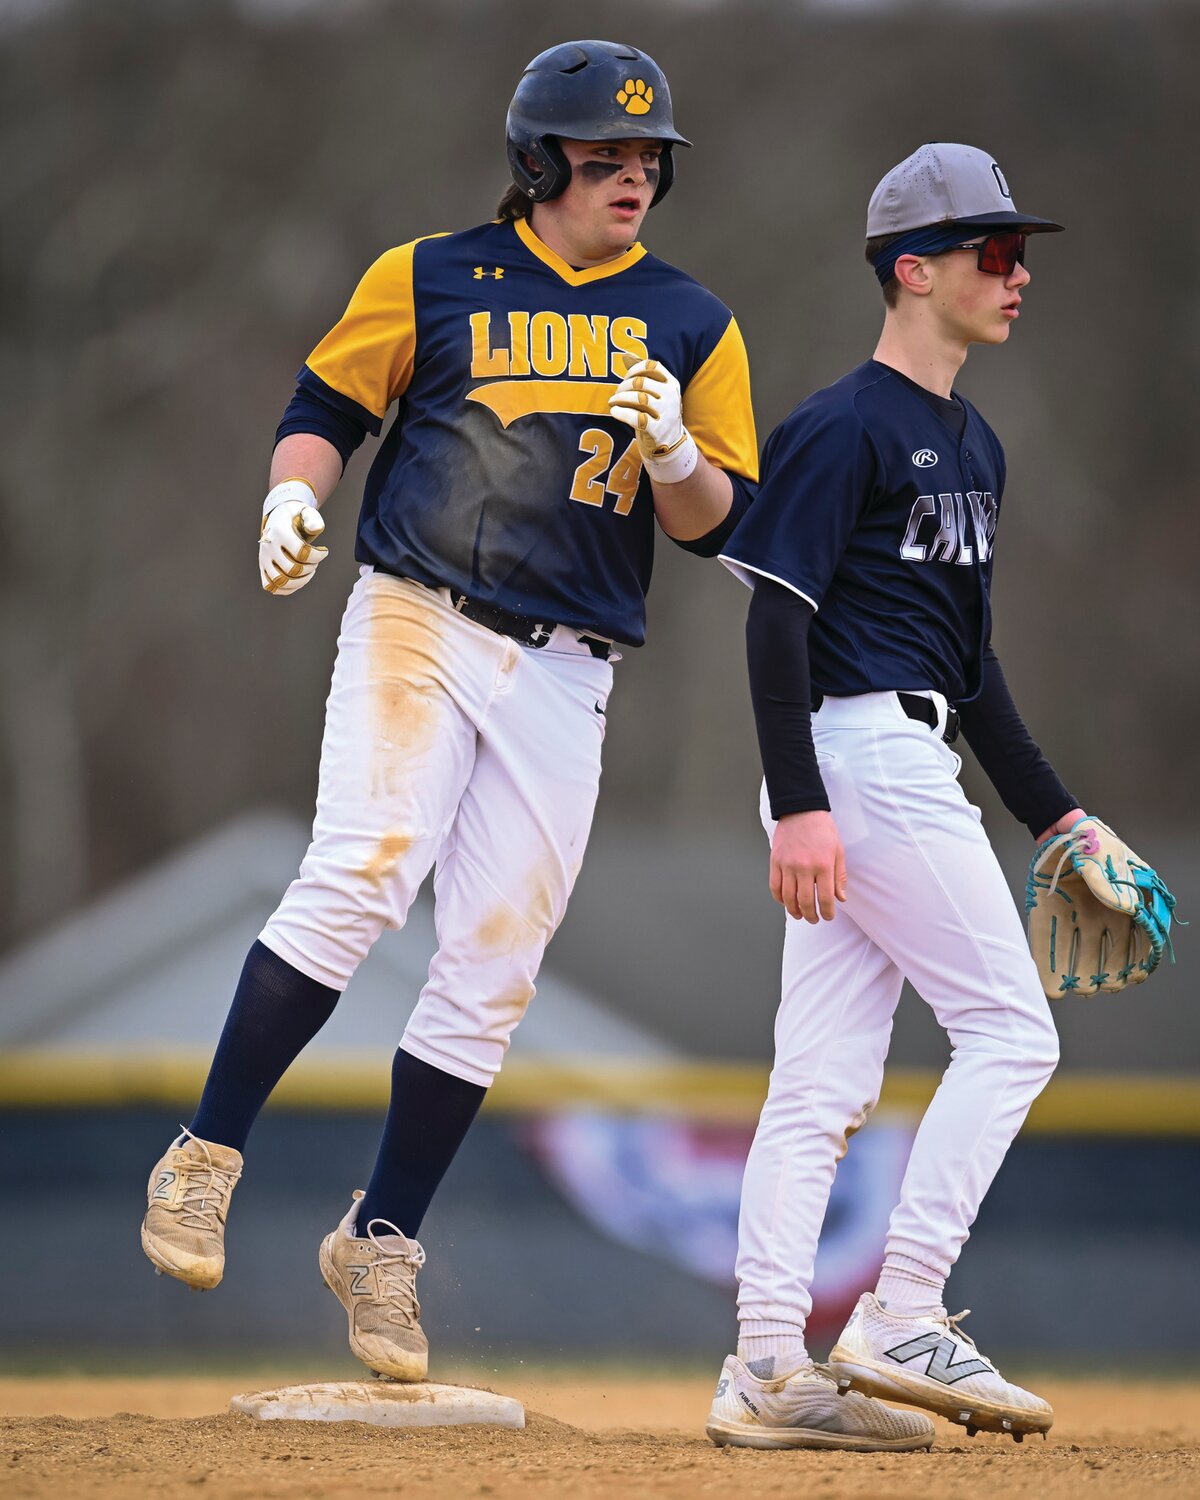 New Hope-Solebury’s Joe Rickard rounds second base after a second-inning double.